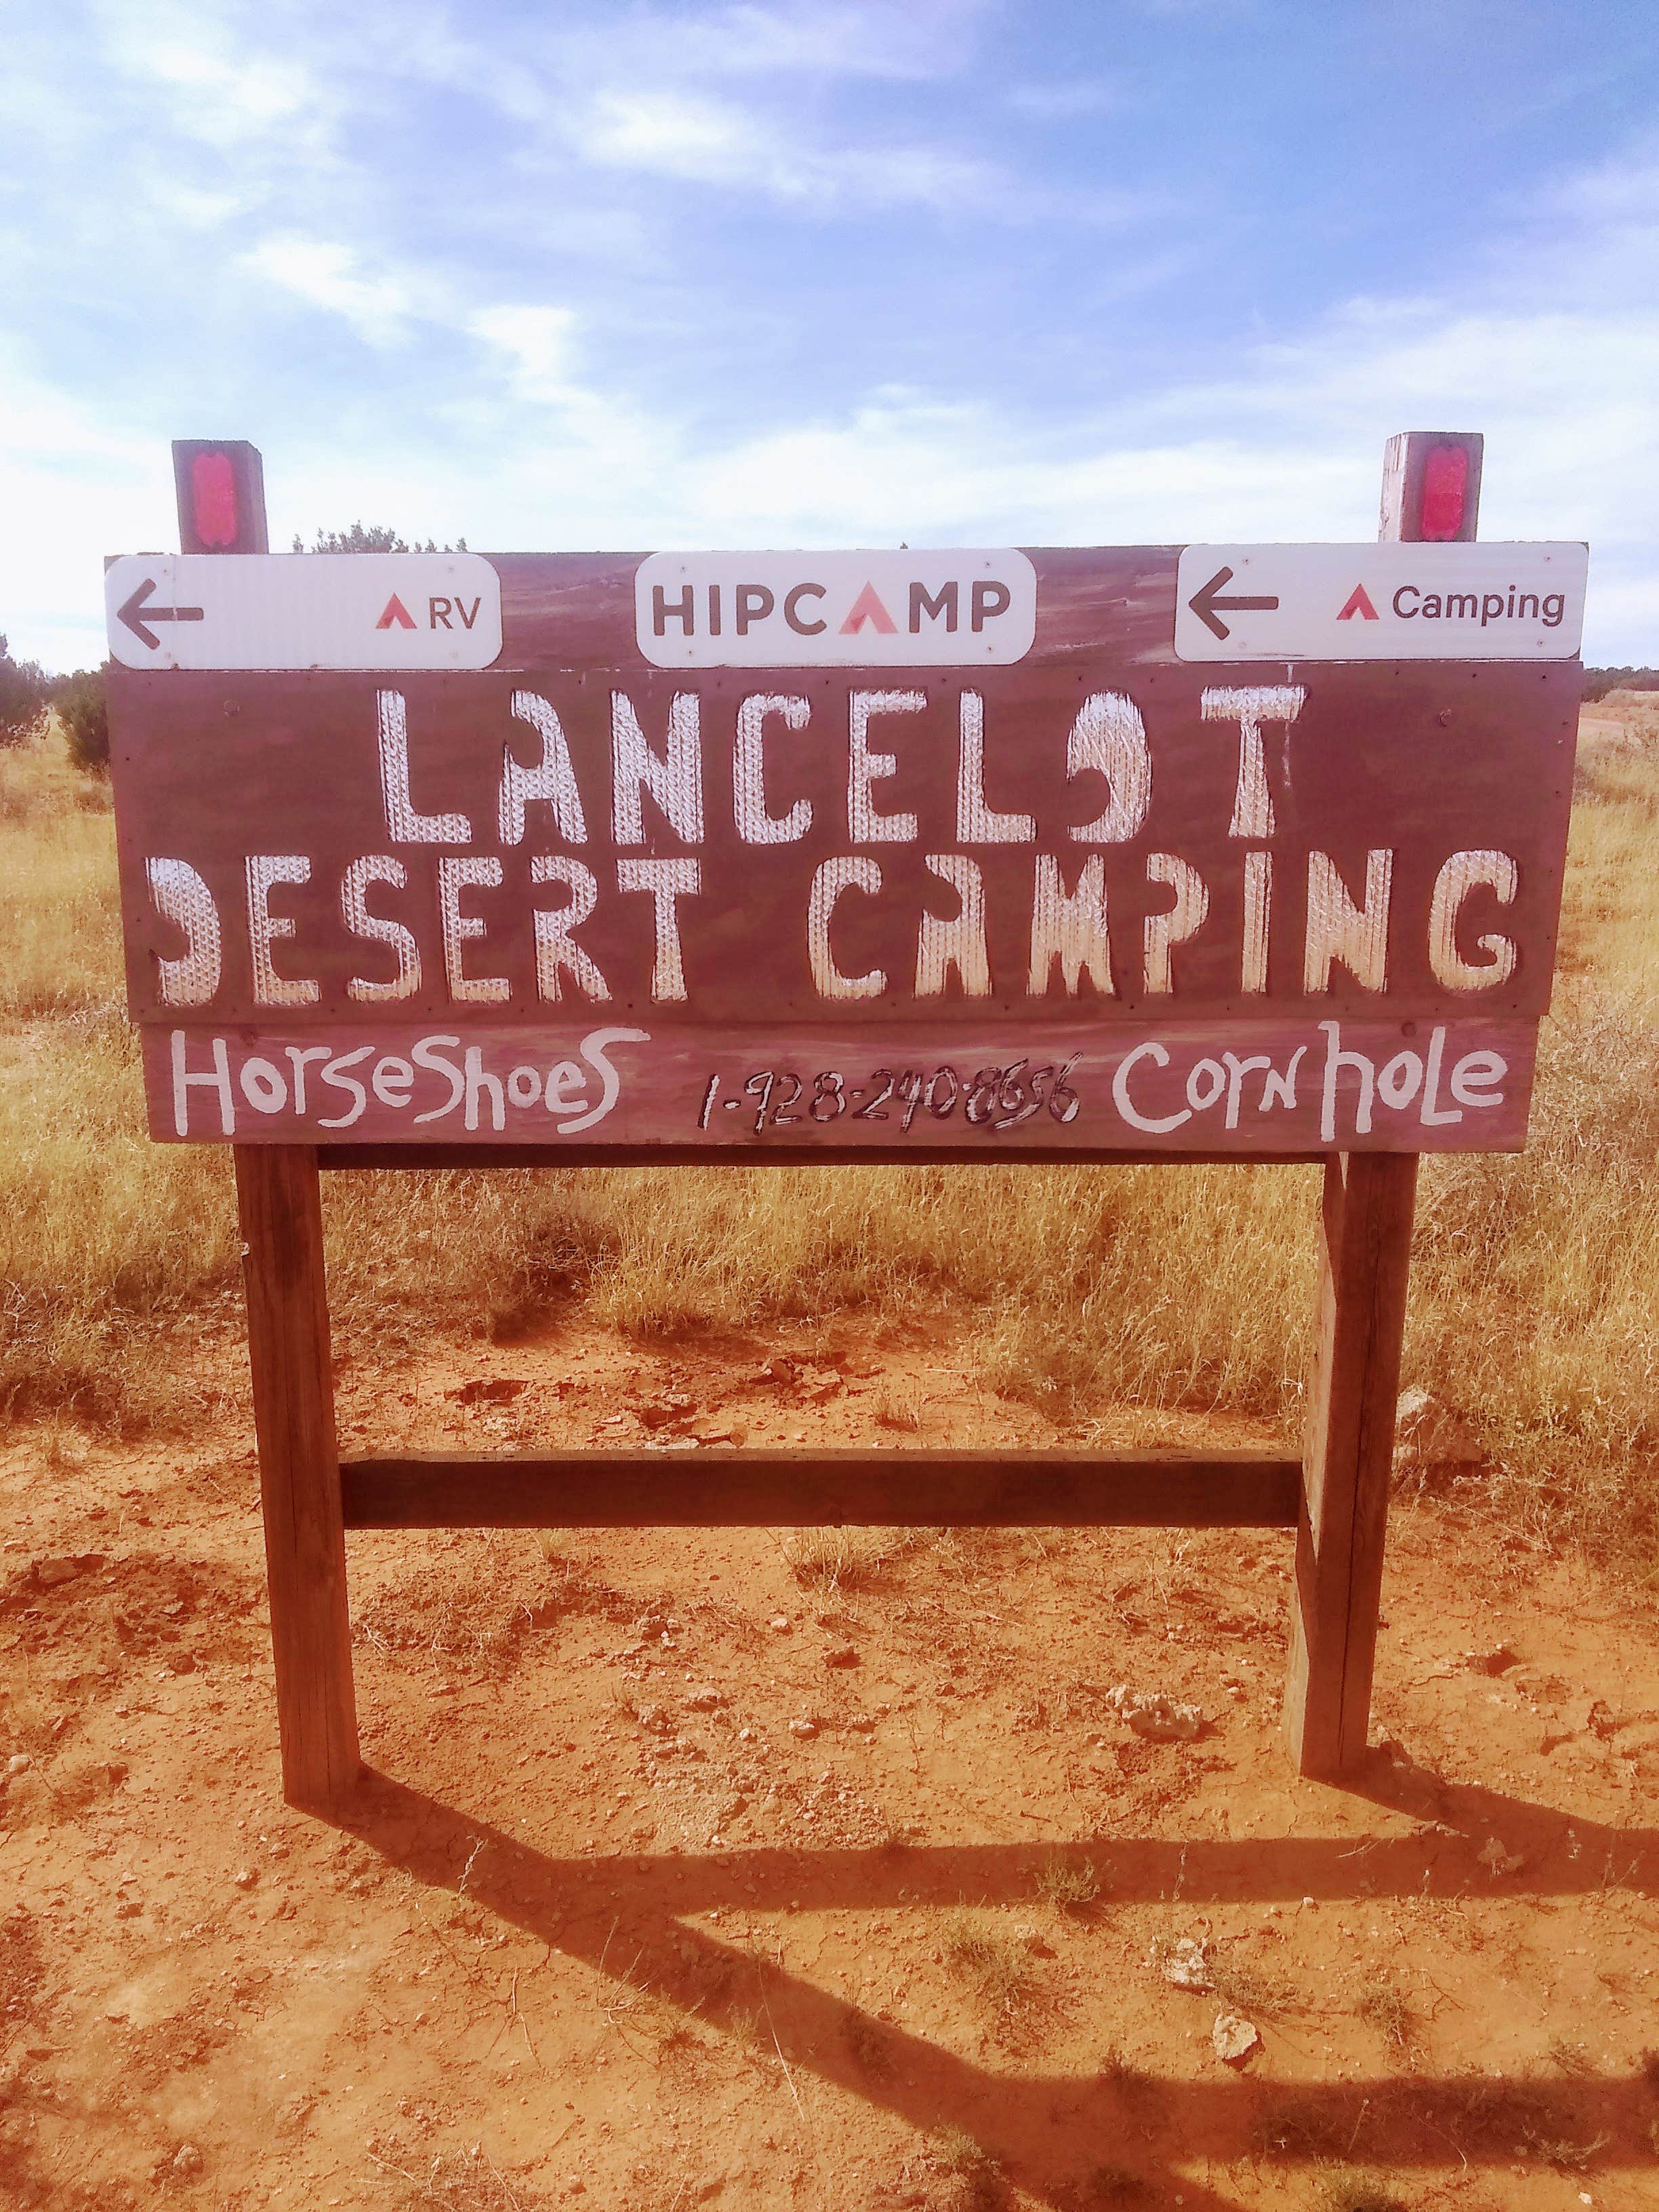 Camper submitted image from Lancelot desert camping - 1